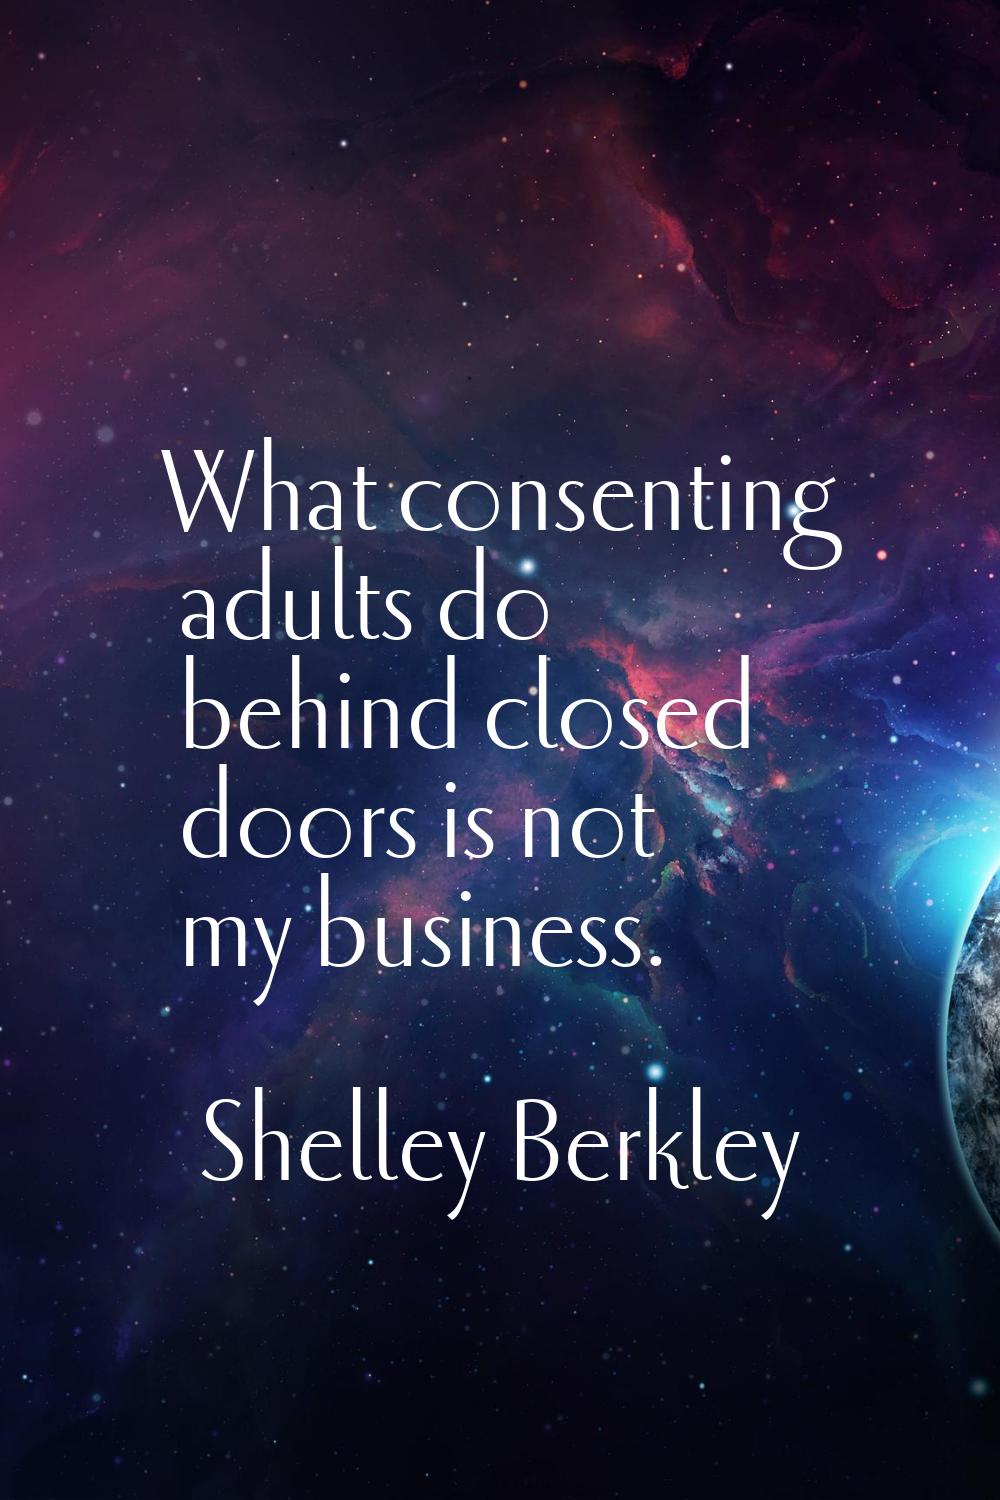 What consenting adults do behind closed doors is not my business.